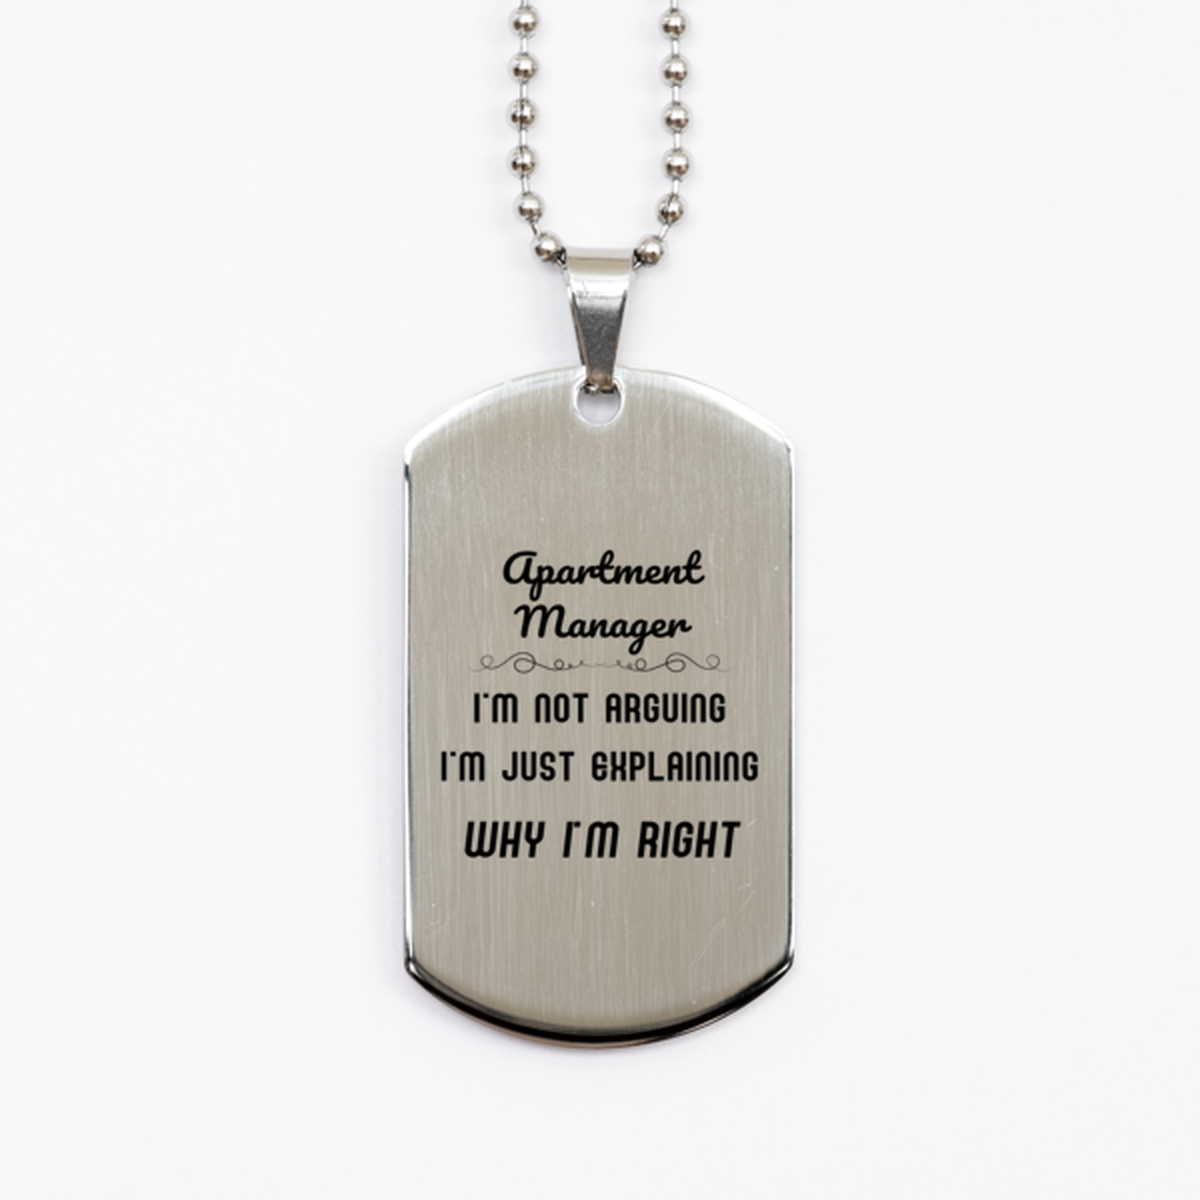 Apartment Manager I'm not Arguing. I'm Just Explaining Why I'm RIGHT Silver Dog Tag, Funny Saying Quote Apartment Manager Gifts For Apartment Manager Graduation Birthday Christmas Gifts for Men Women Coworker